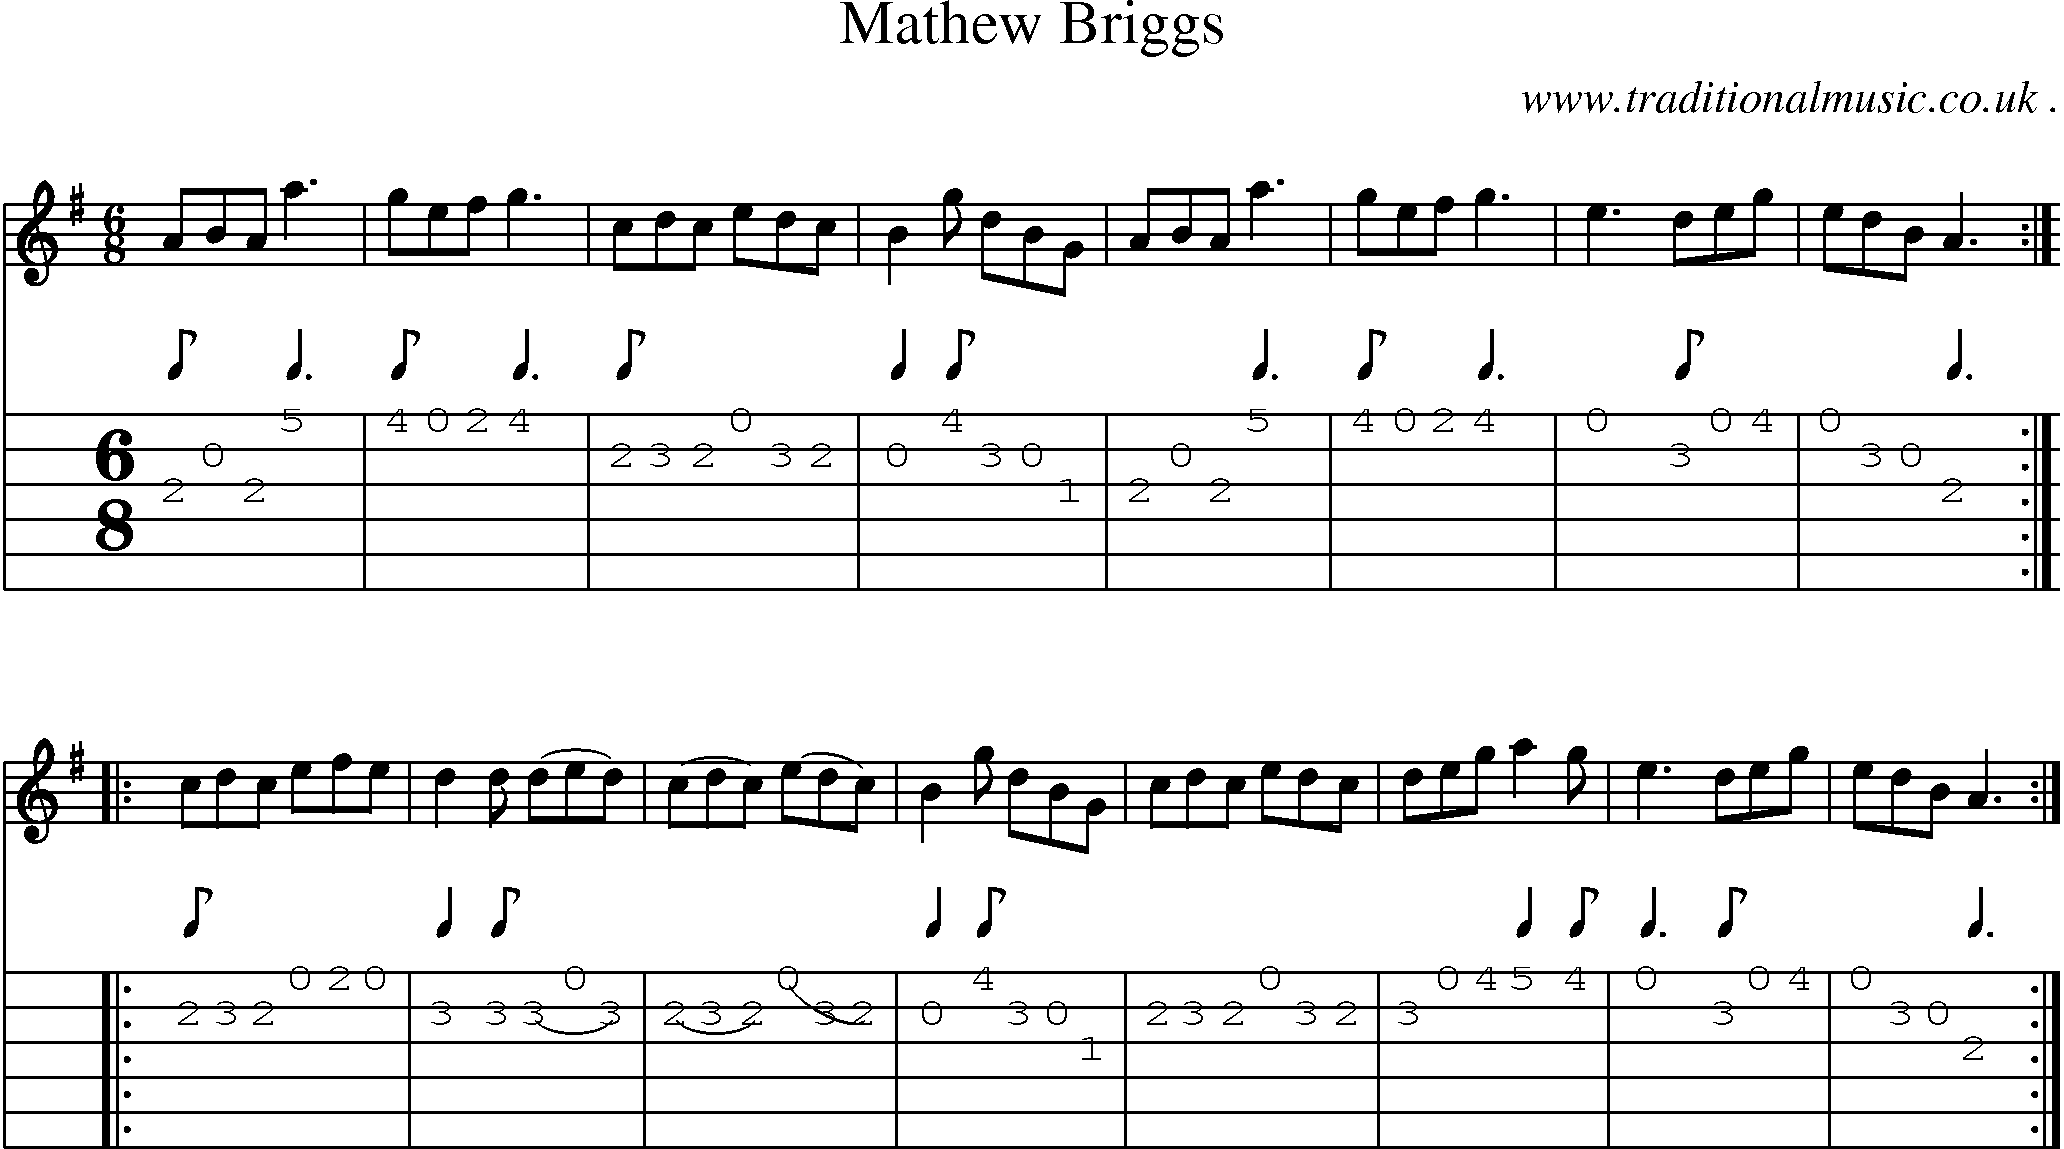 Sheet-Music and Guitar Tabs for Mathew Briggs